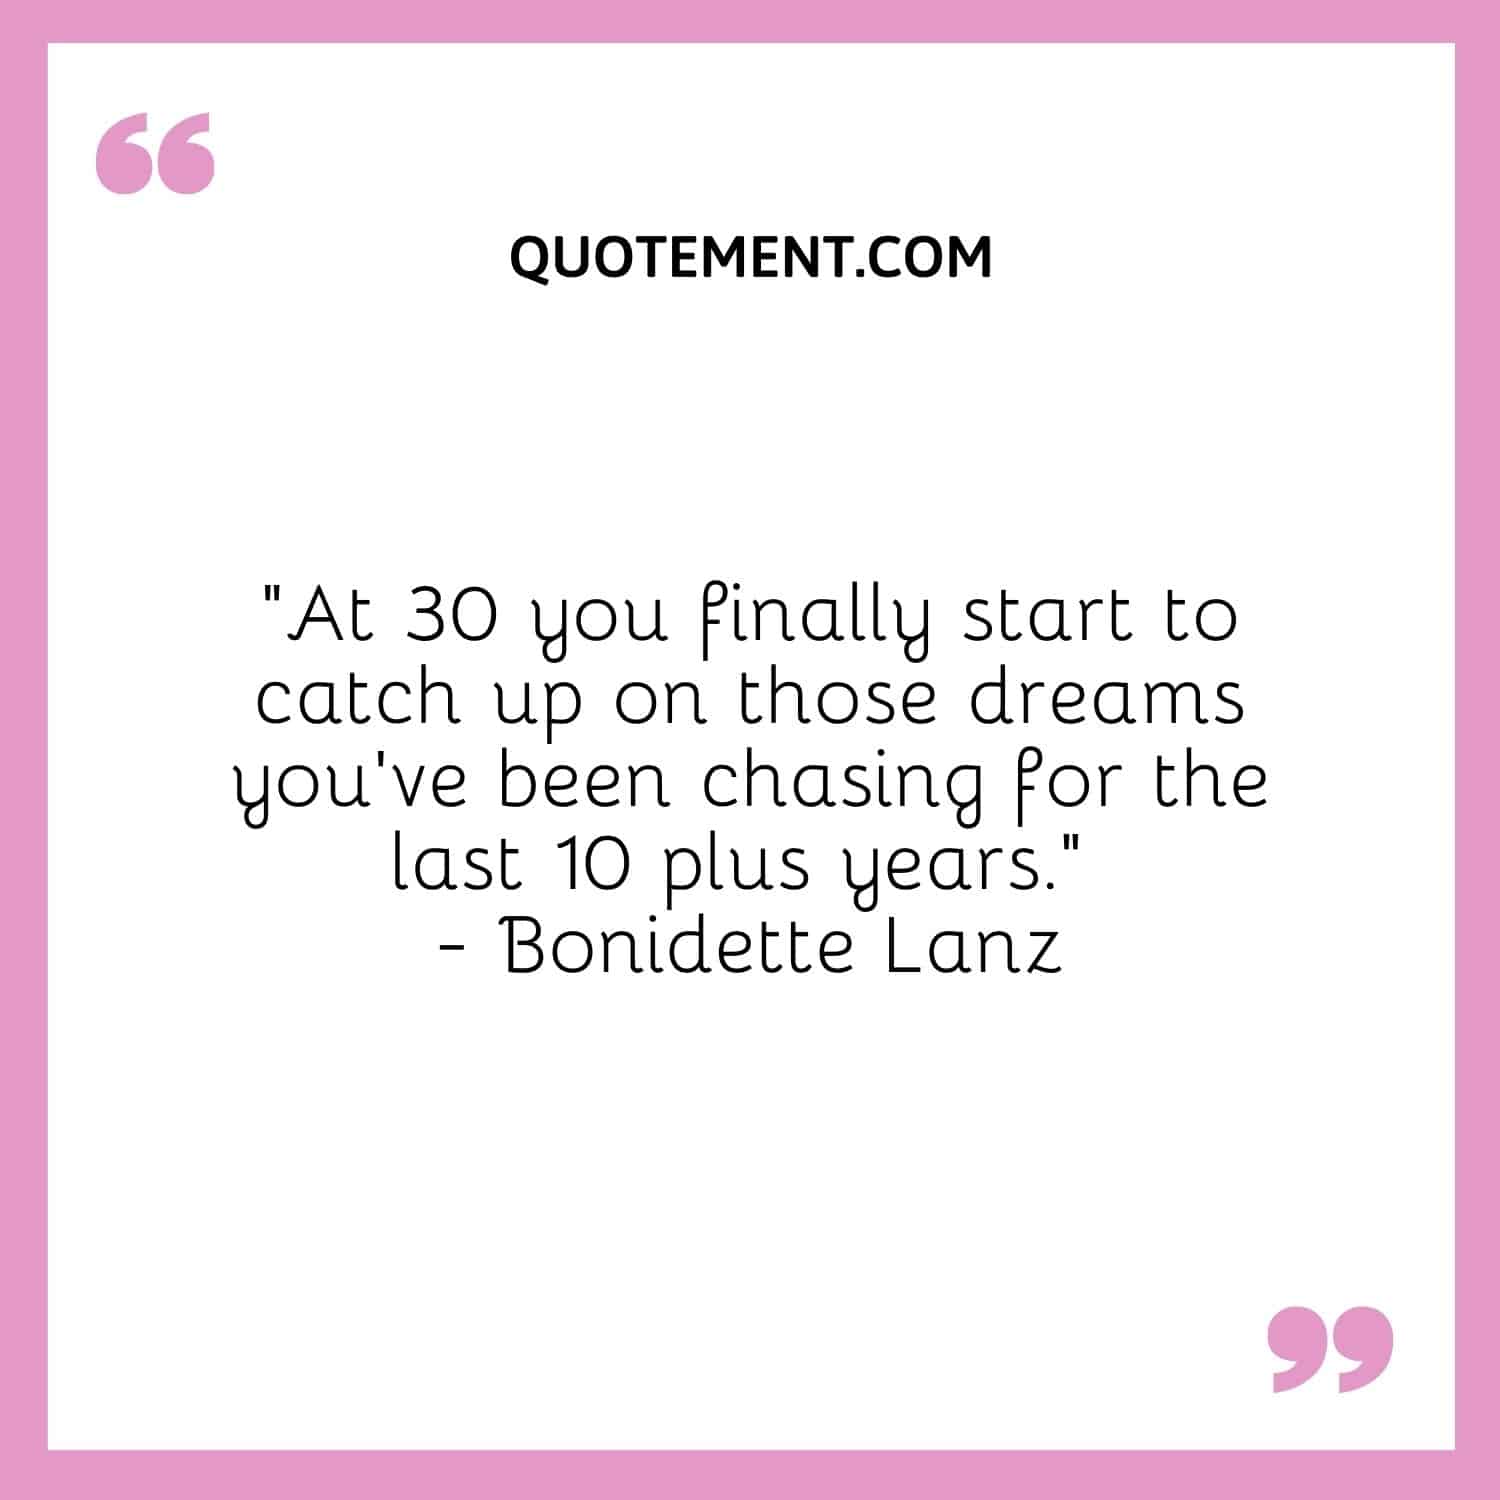 “At 30 you finally start to catch up on those dreams you’ve been chasing for the last 10 plus years.” — Bonidette Lanz